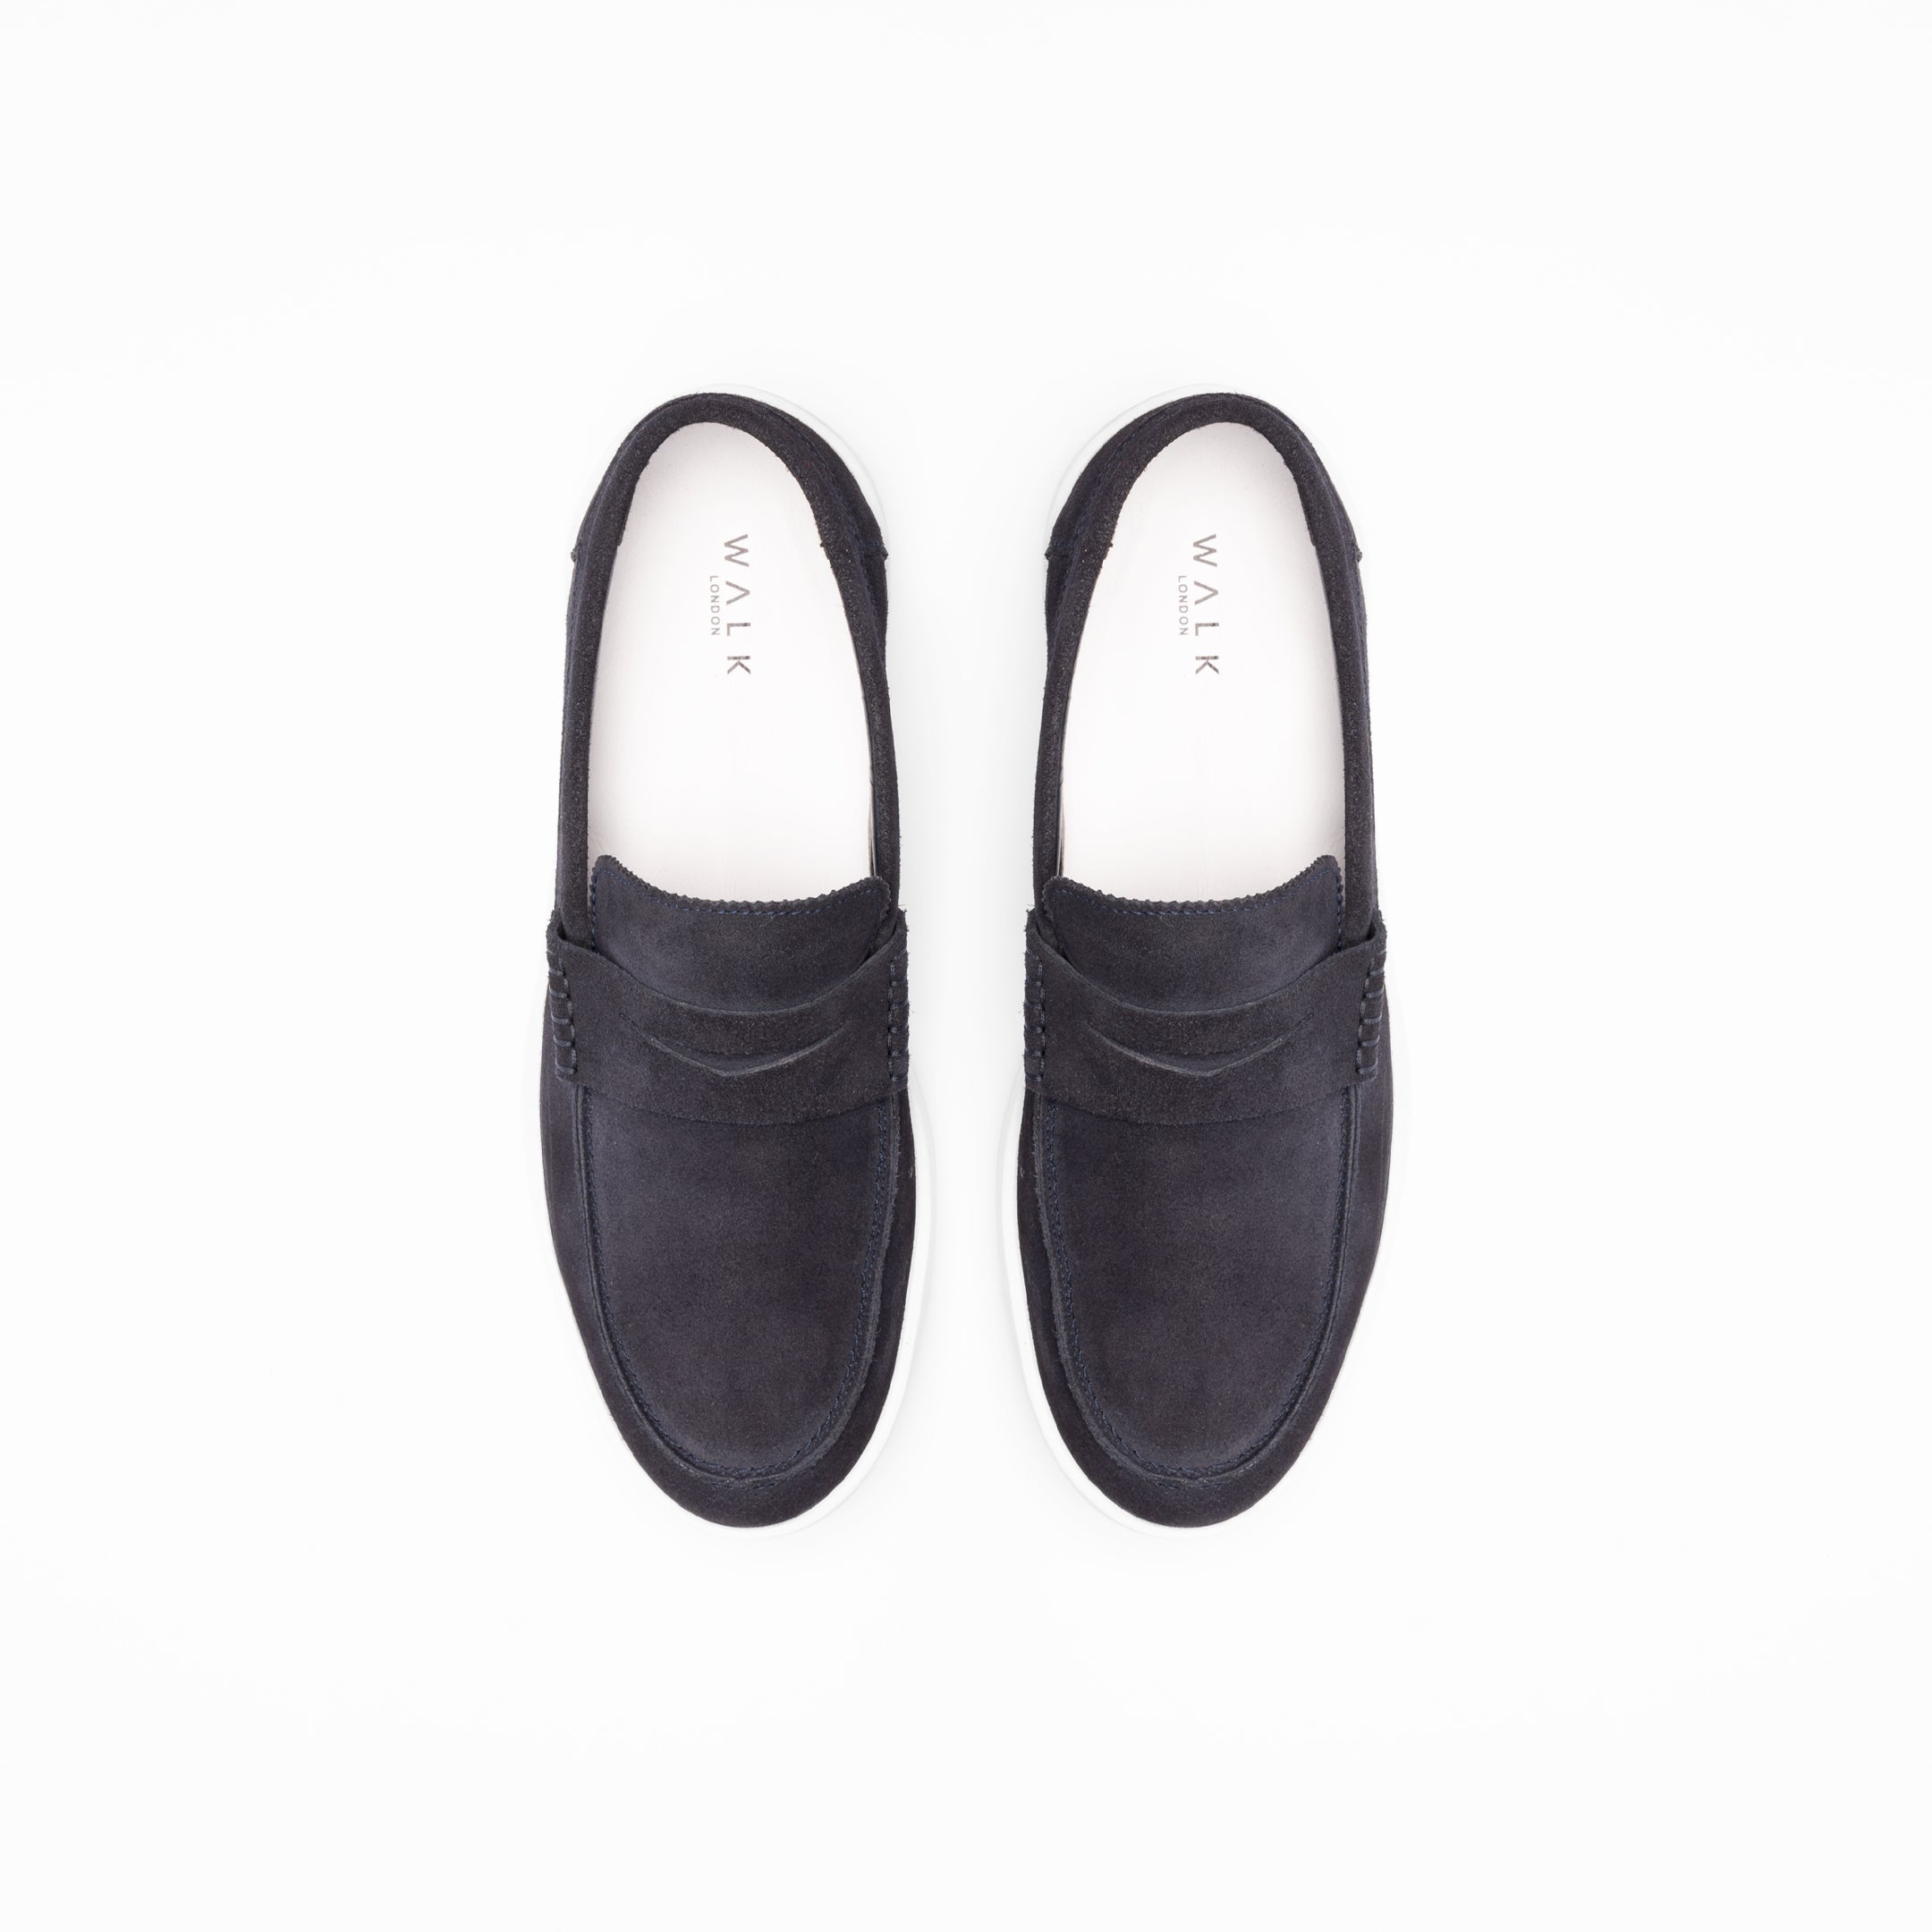 WALK London Mens Paolo Loafer Navy Suede